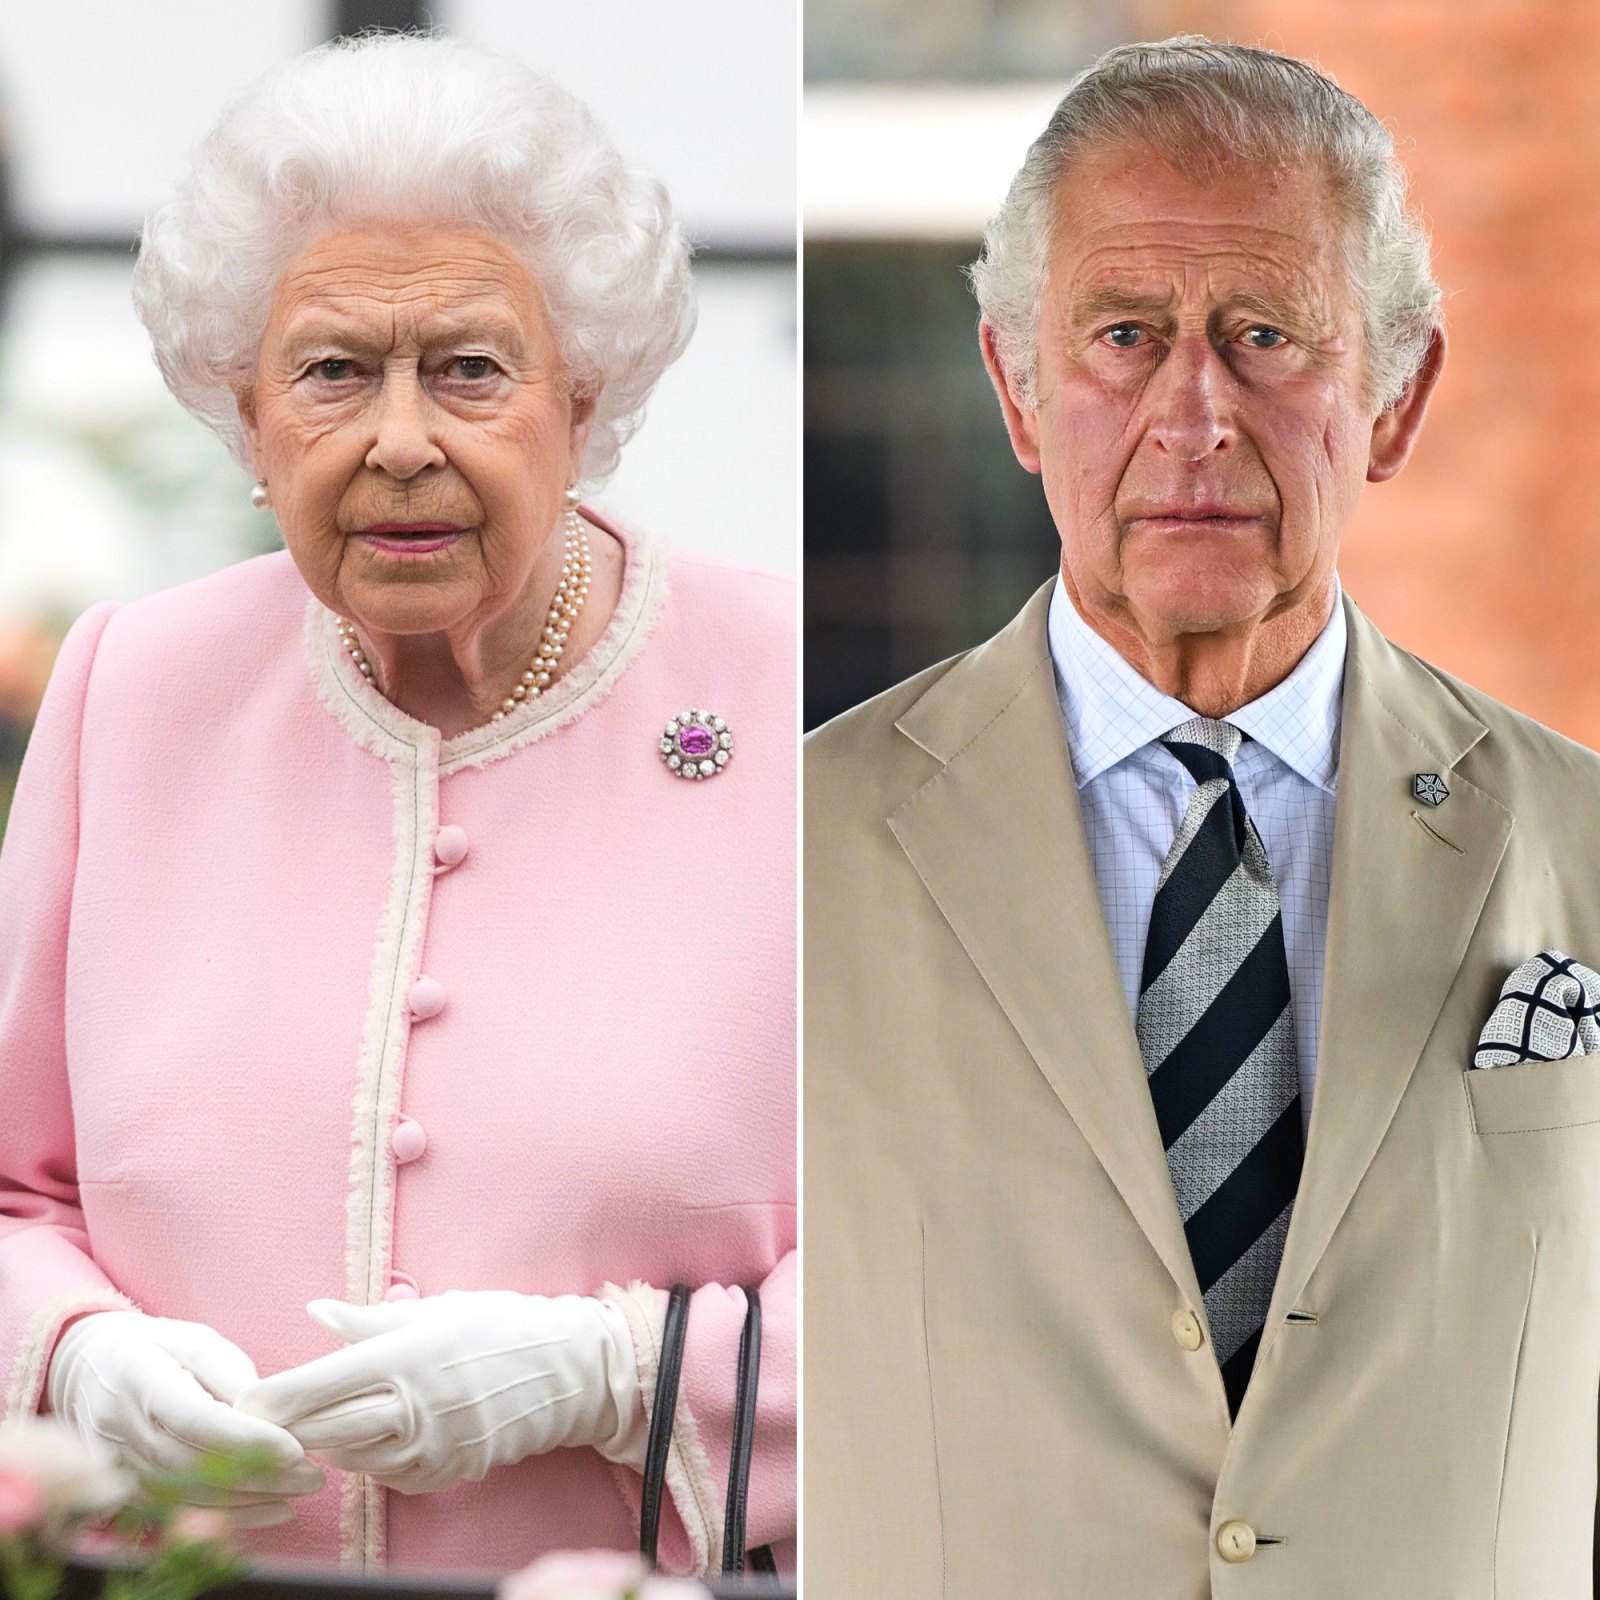 Queen Elizabeth II Dead at 96: Prince Charles and More Royal Family Members React